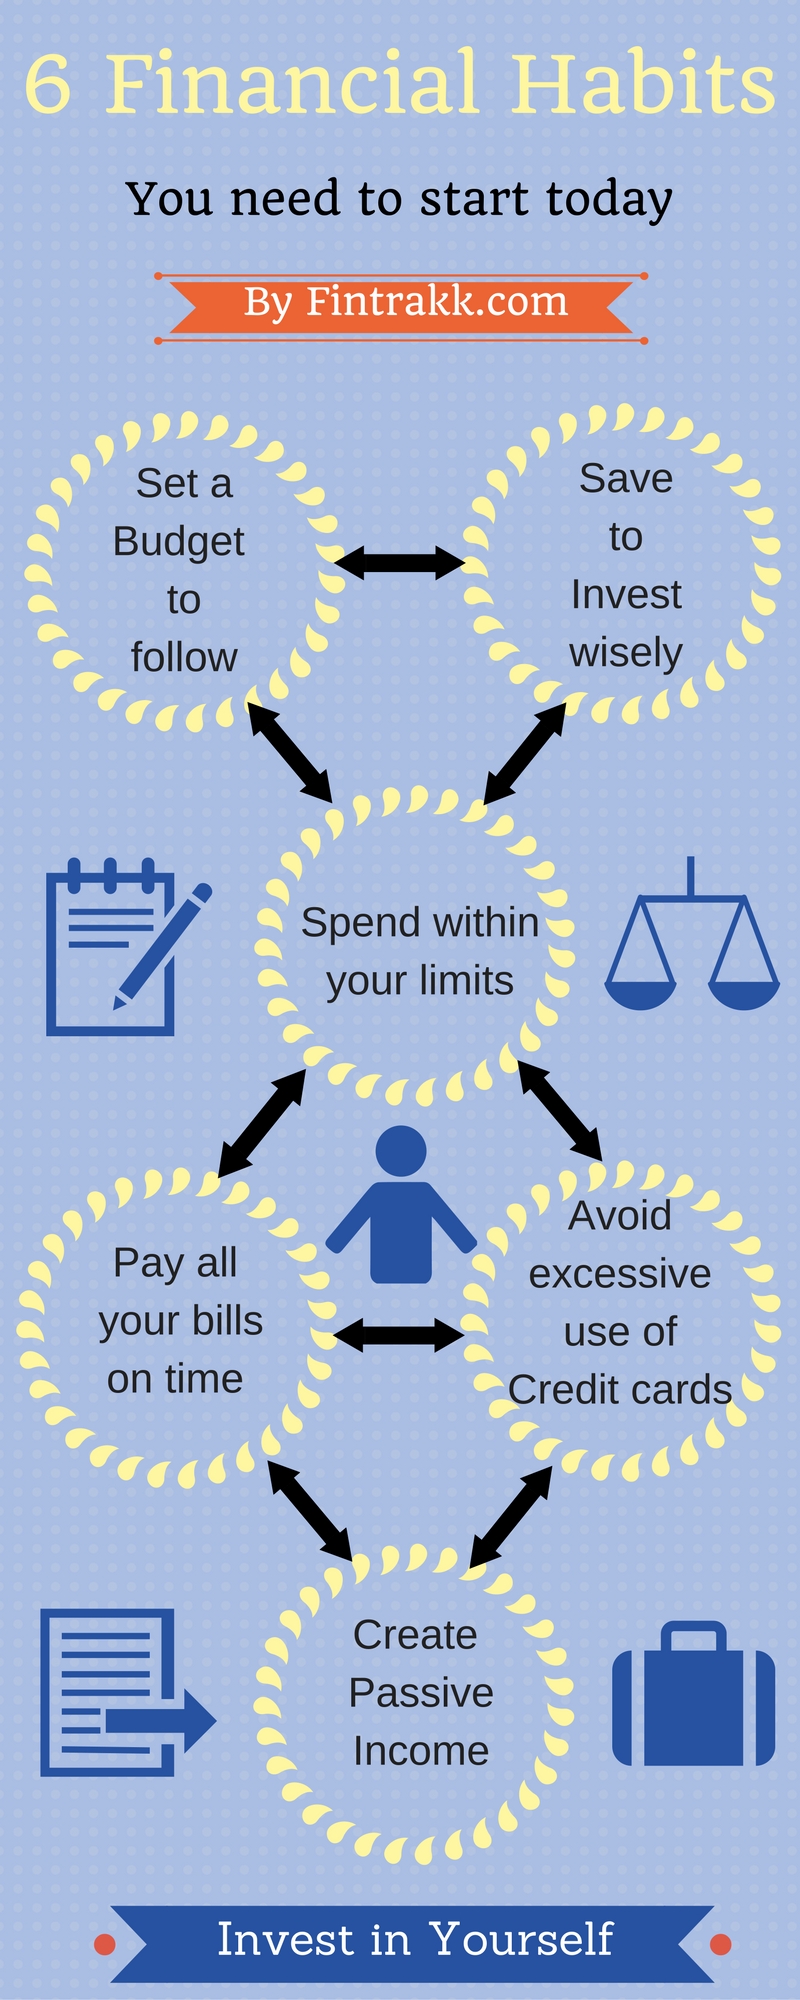 Financial habits Infographic,financial habits to follow,Personal Finance infographic,Saving & Investing infographic